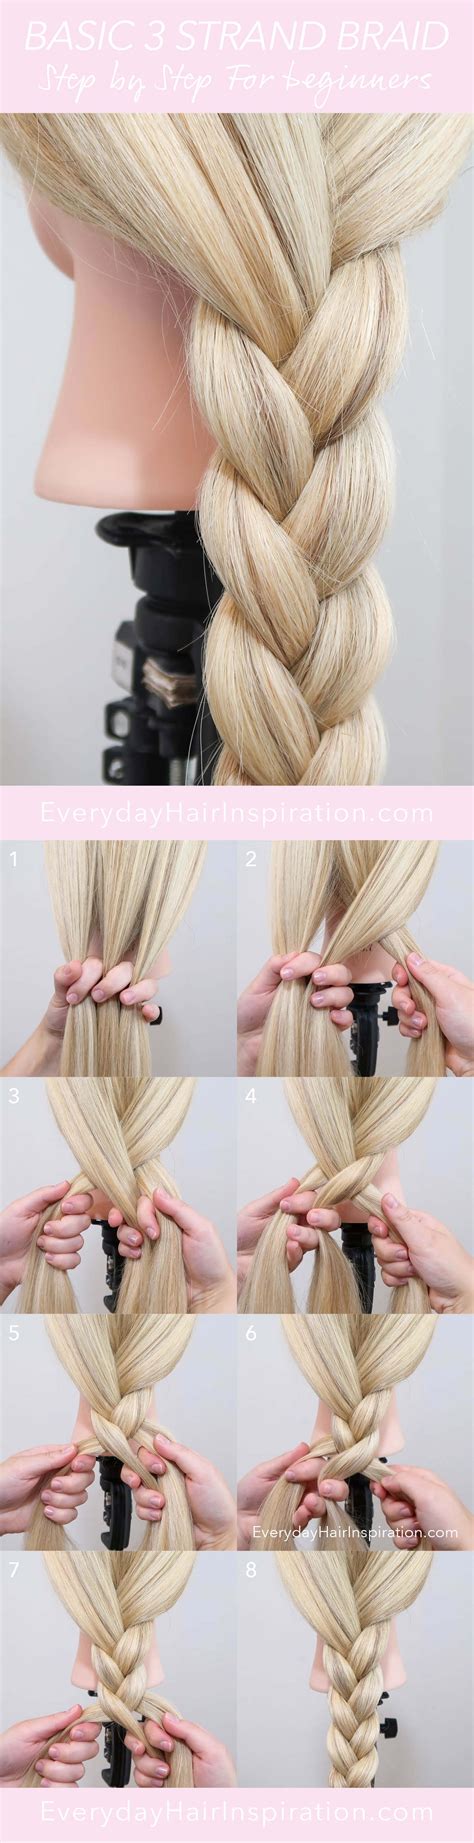 39+ New Simple And Easy Braided Hairstyles Step By Step